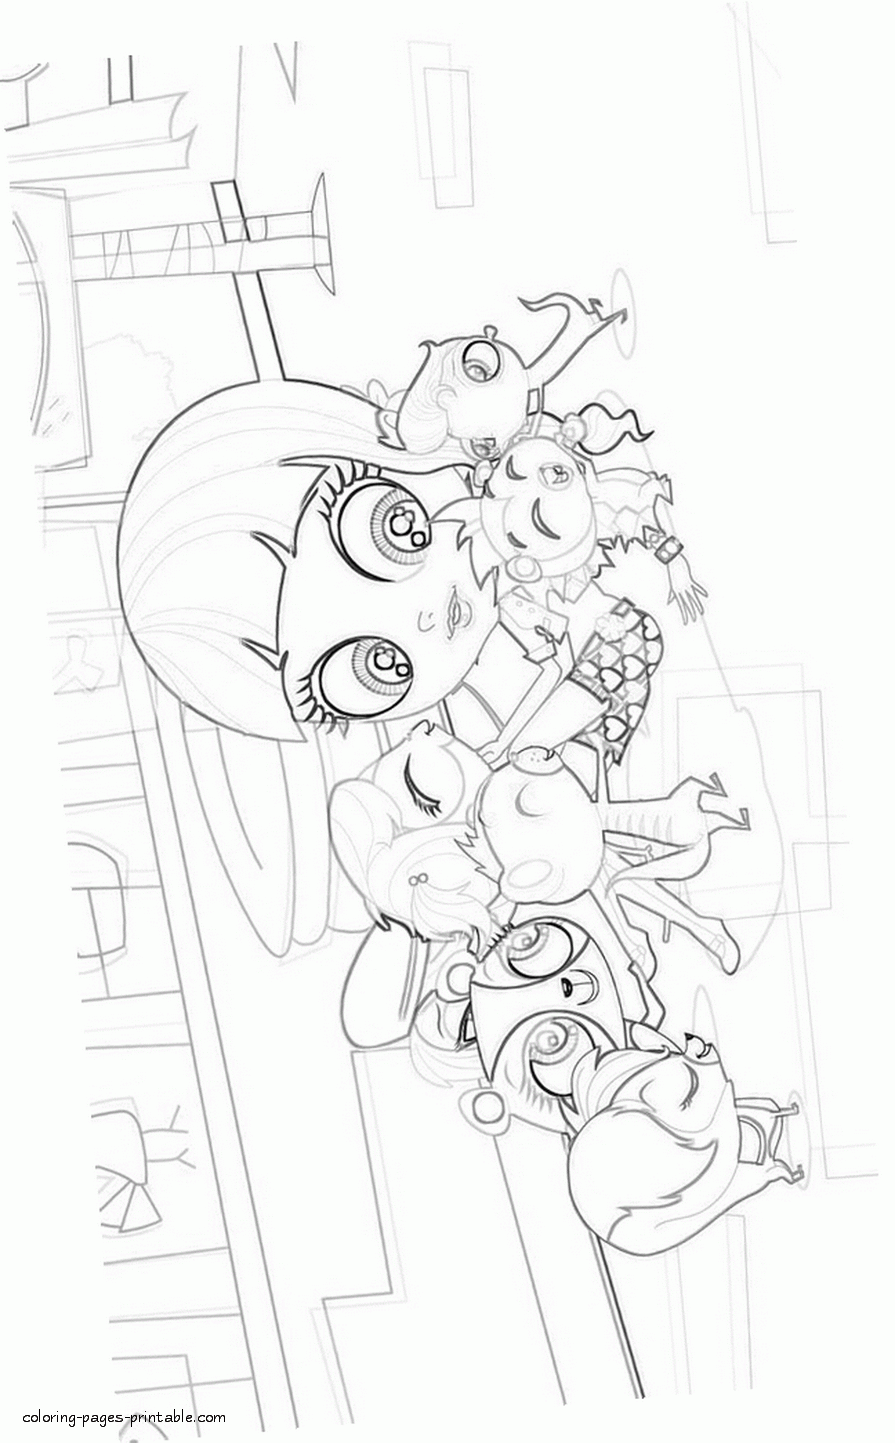 Littlest pet shop. Coloring page for girls